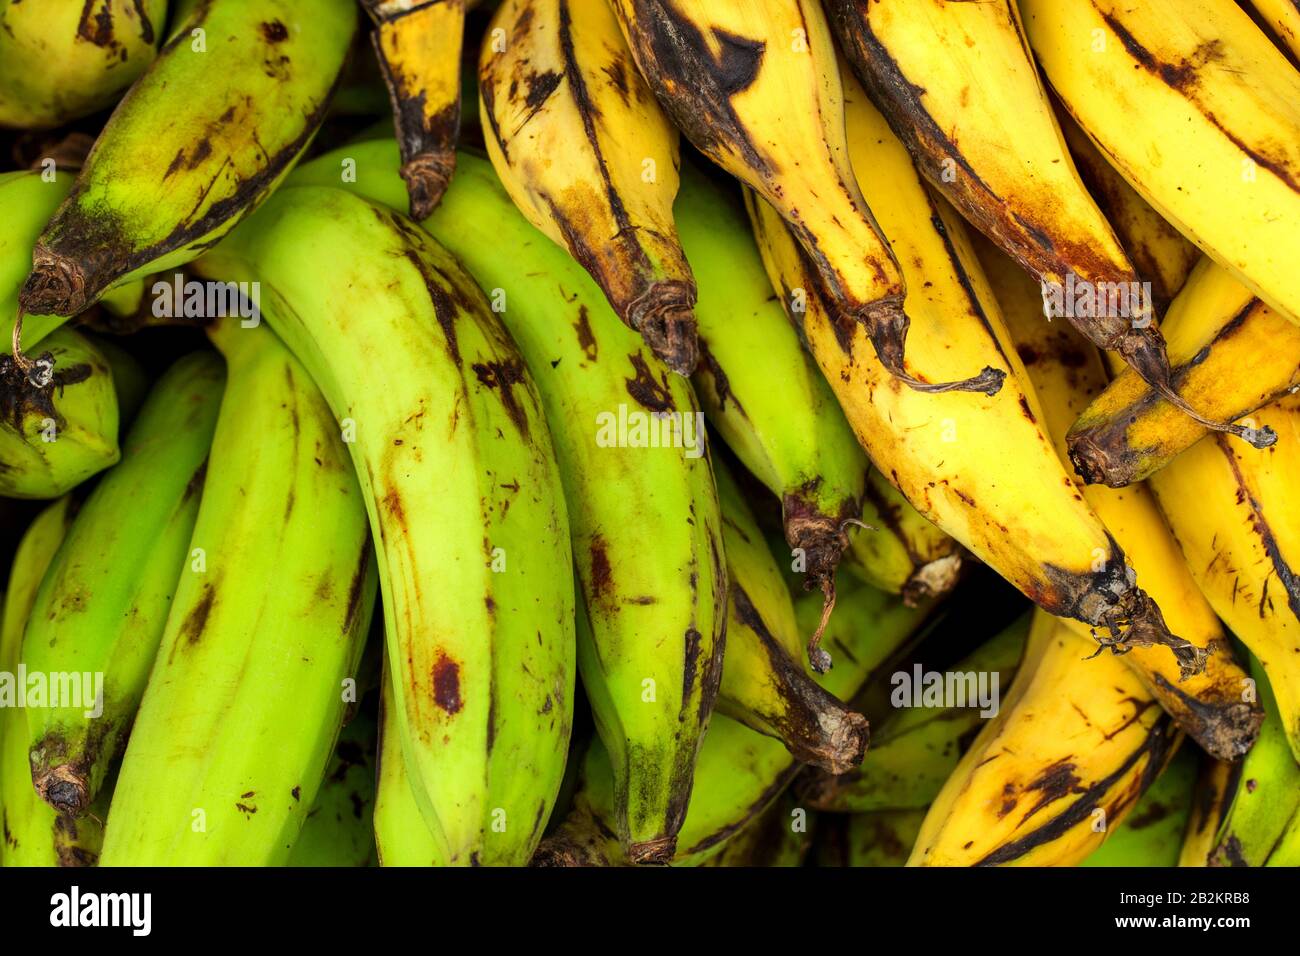 Different Types Of Bananas Displayed In The Market Stock Photo